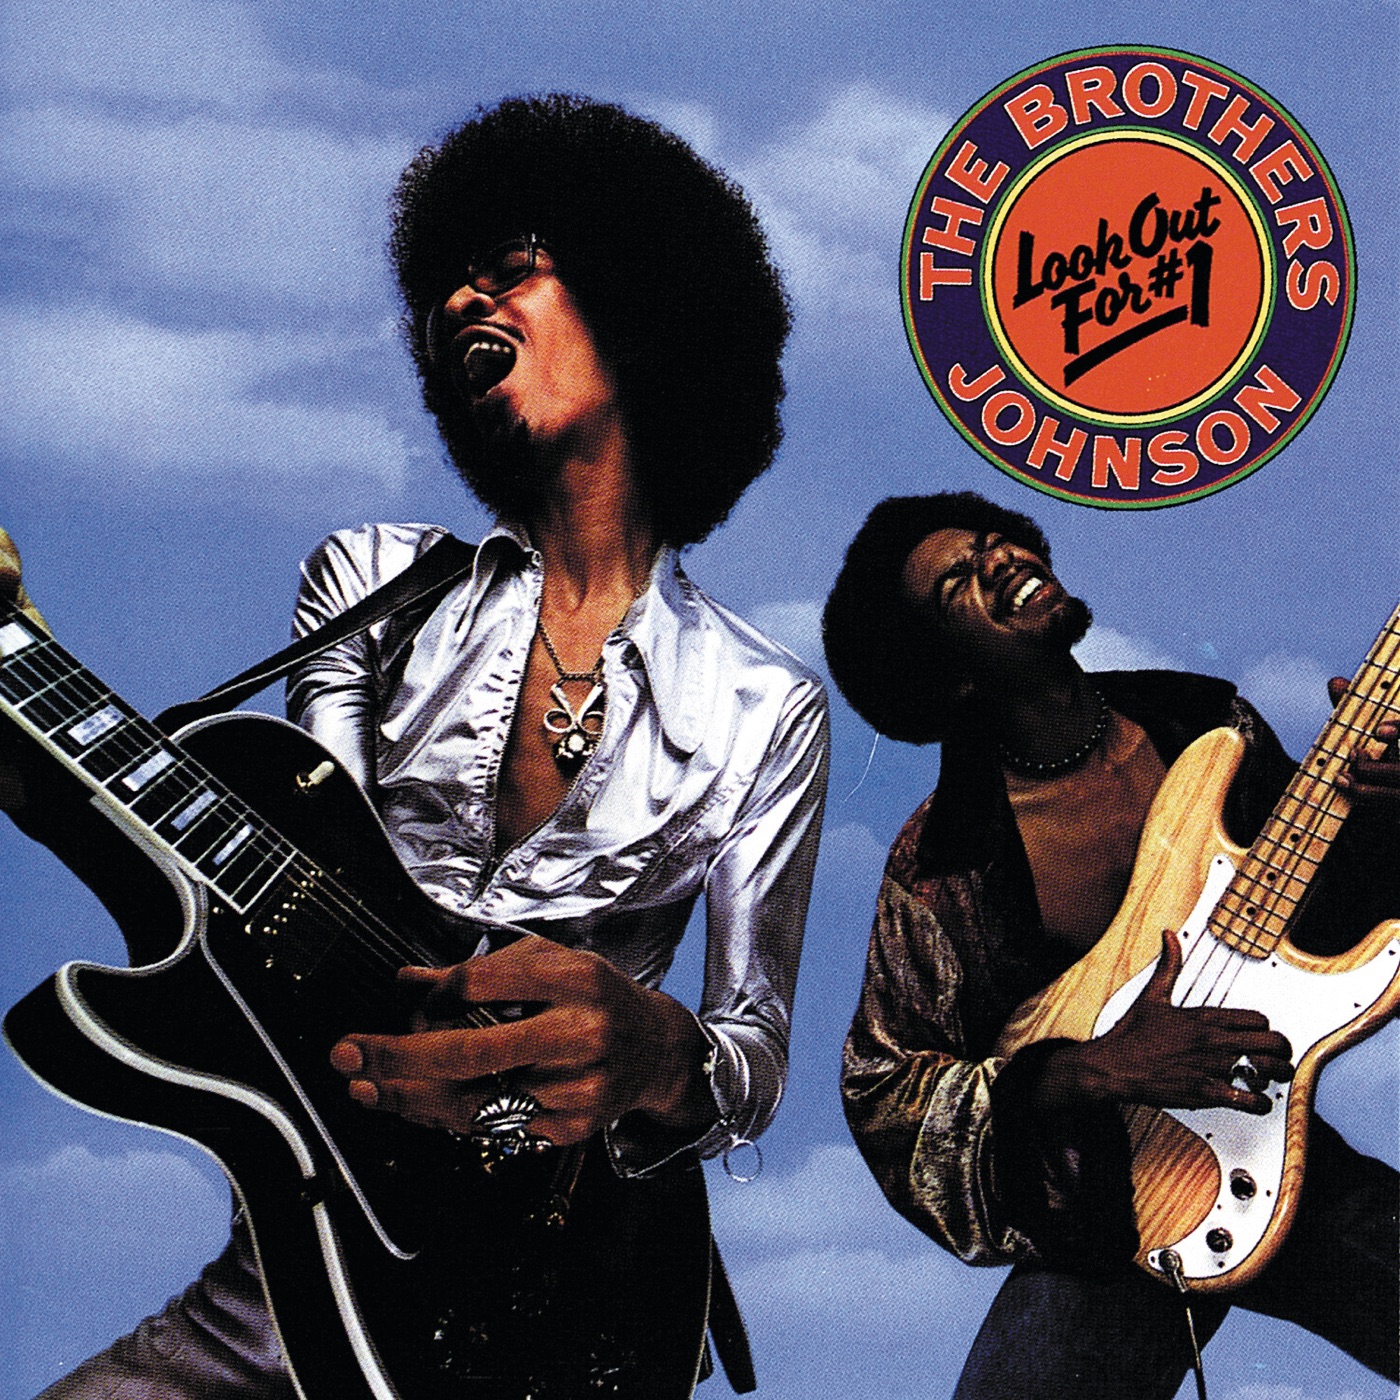 Look Out for #1 by The Brothers Johnson